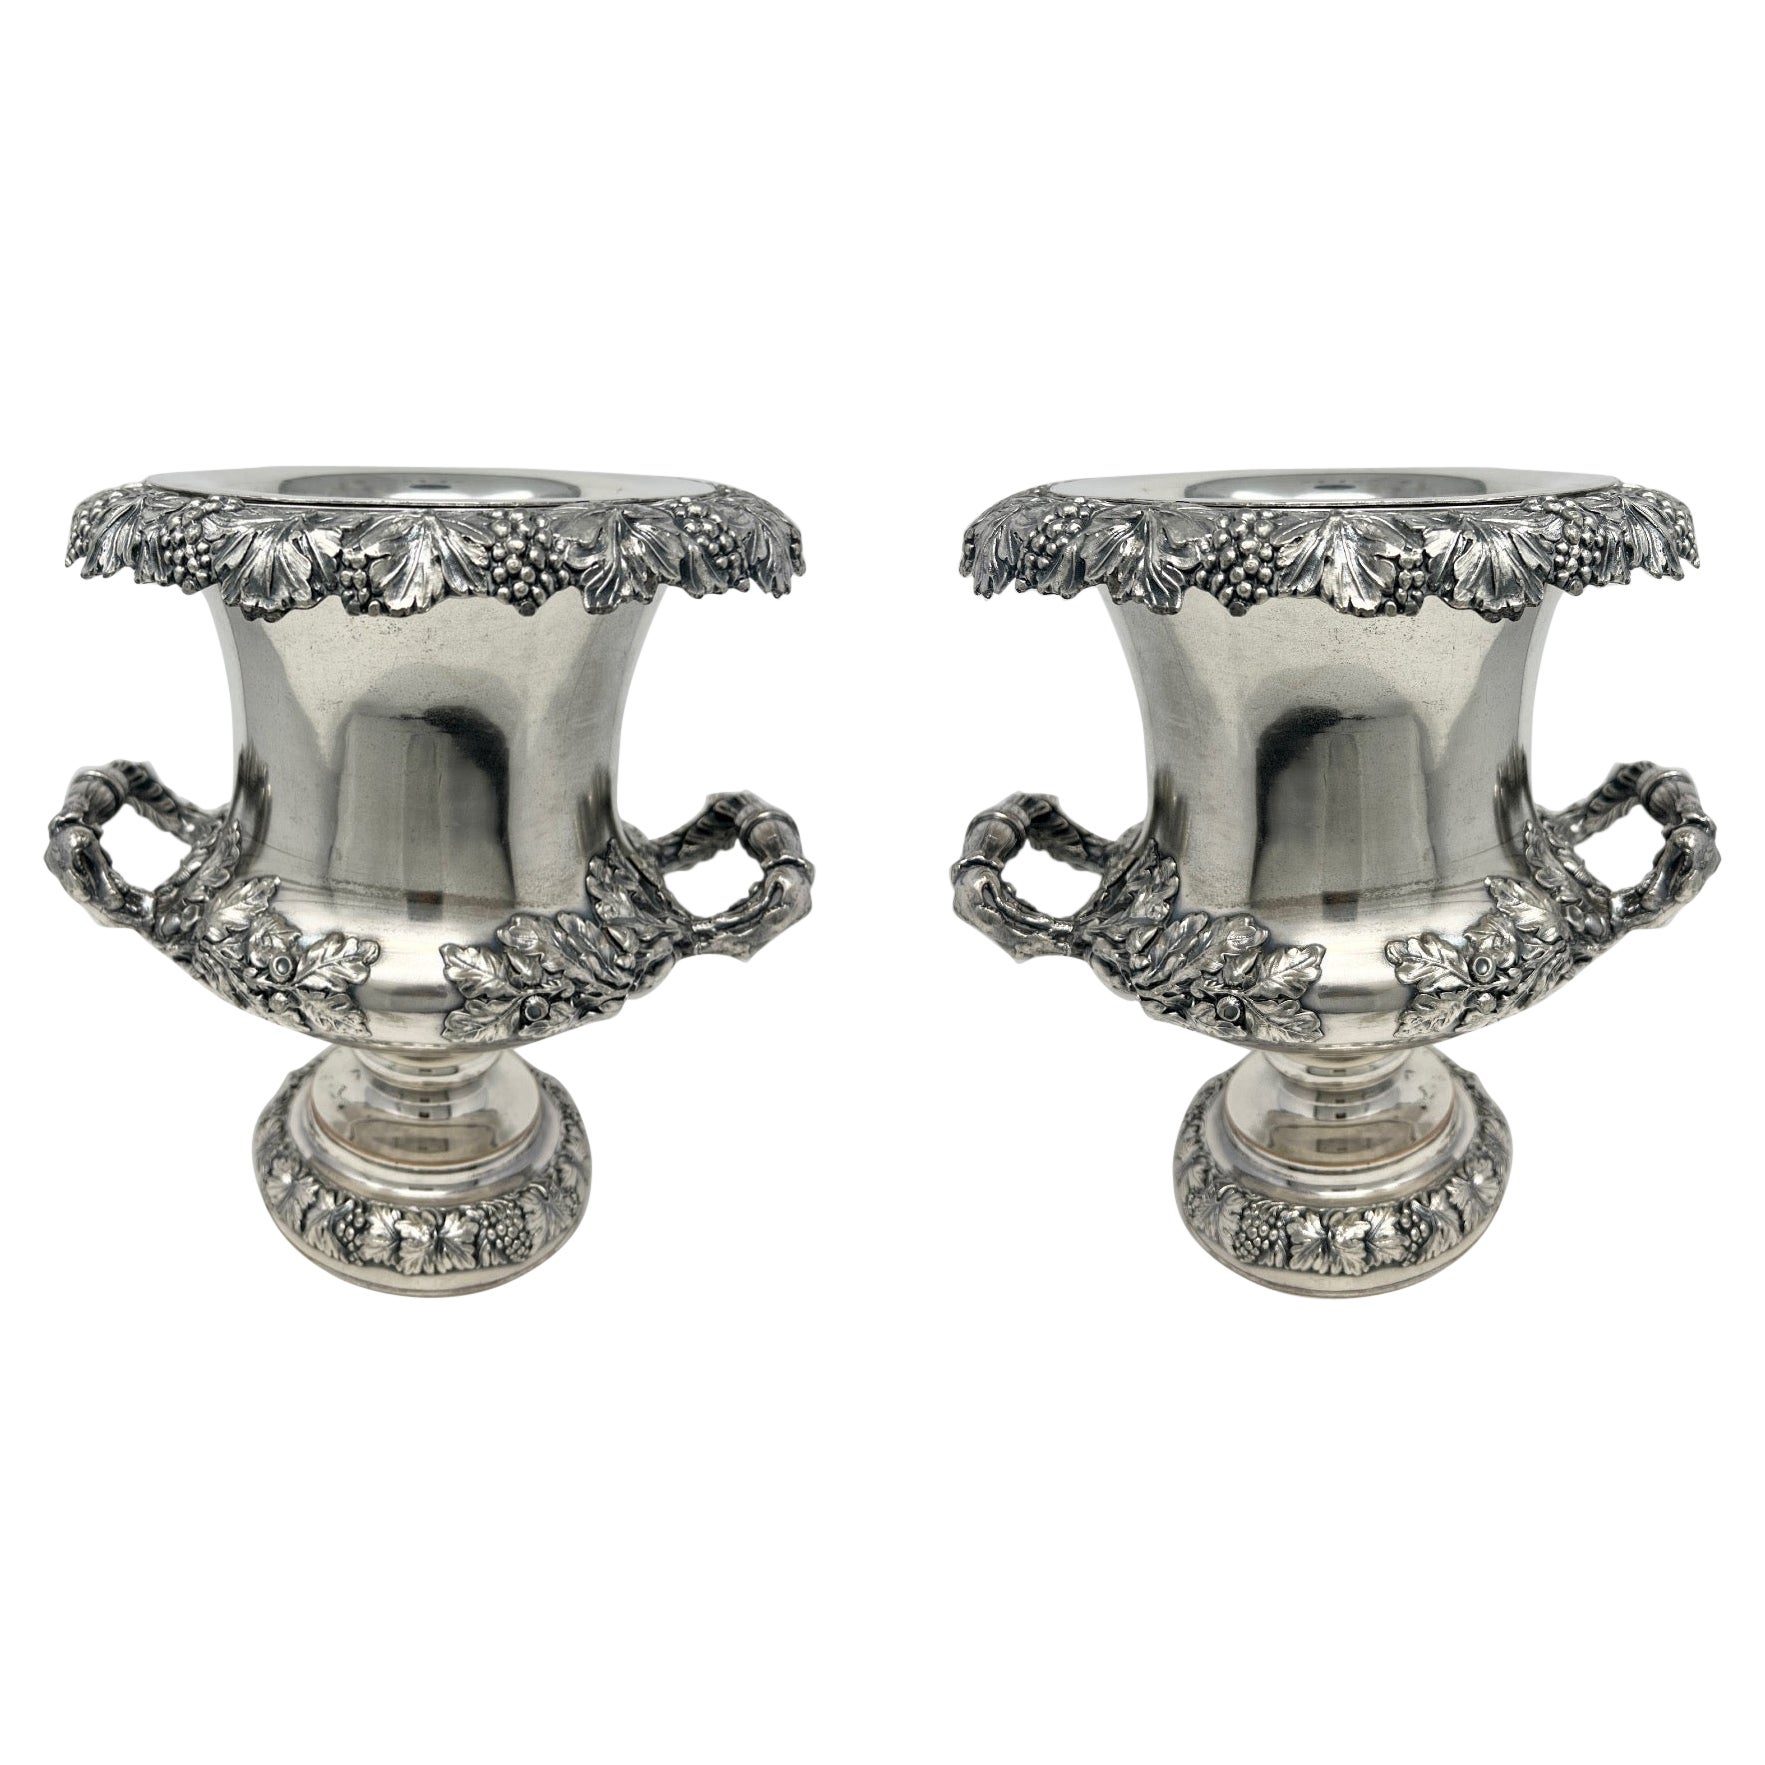 Pair Antique American "Sheffield" Silver Plate Wine Coolers, Circa 1860.